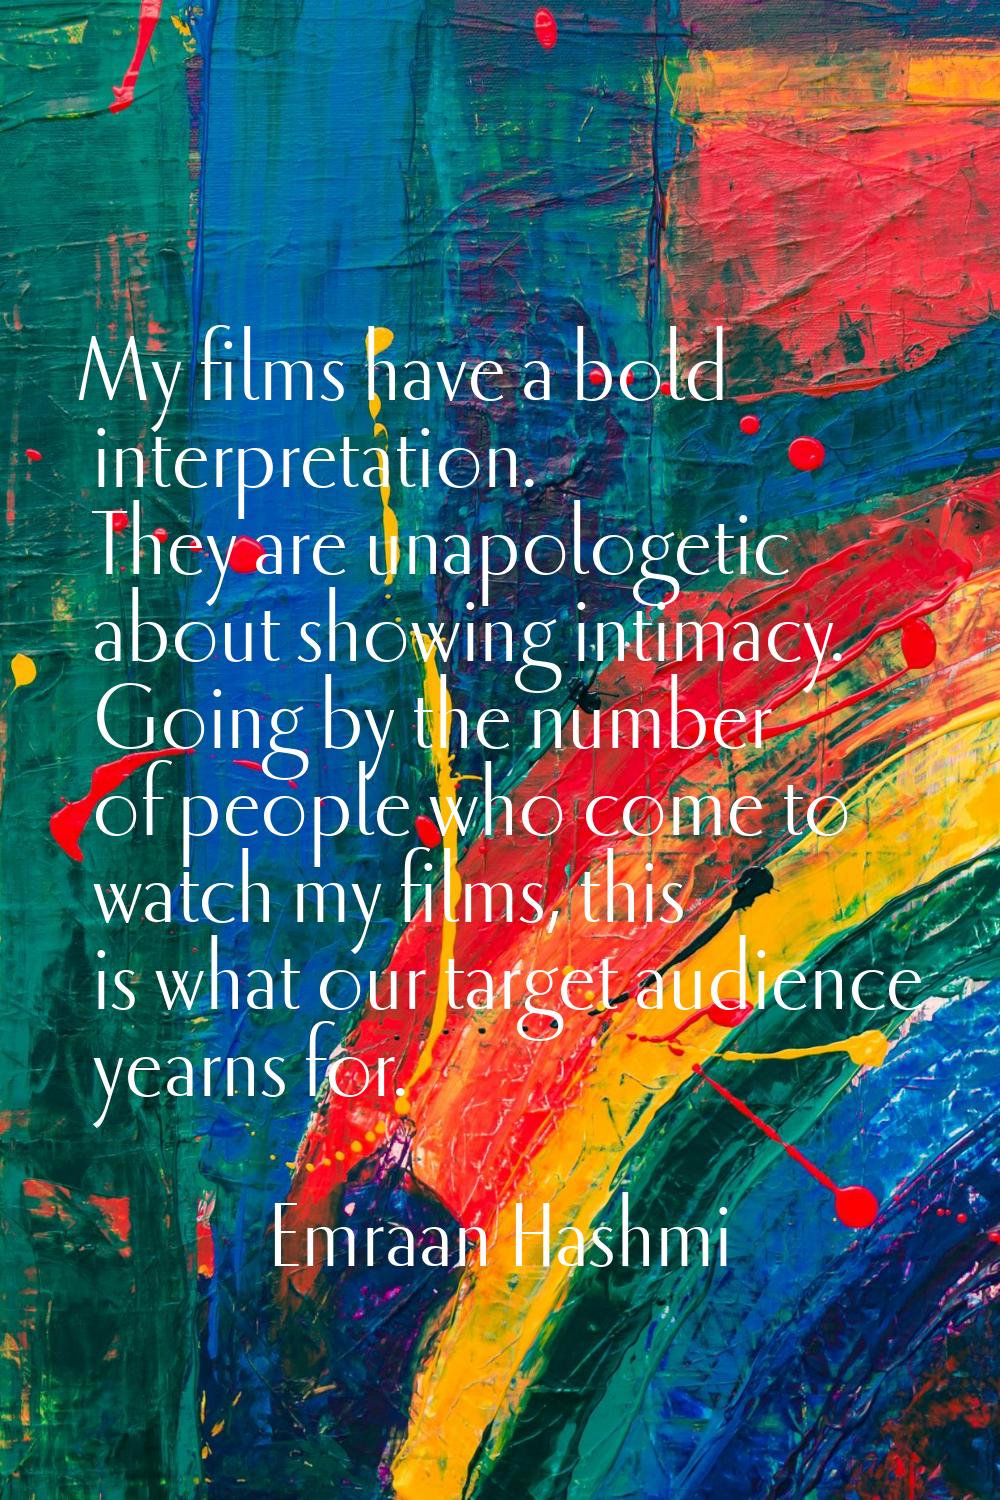 My films have a bold interpretation. They are unapologetic about showing intimacy. Going by the num